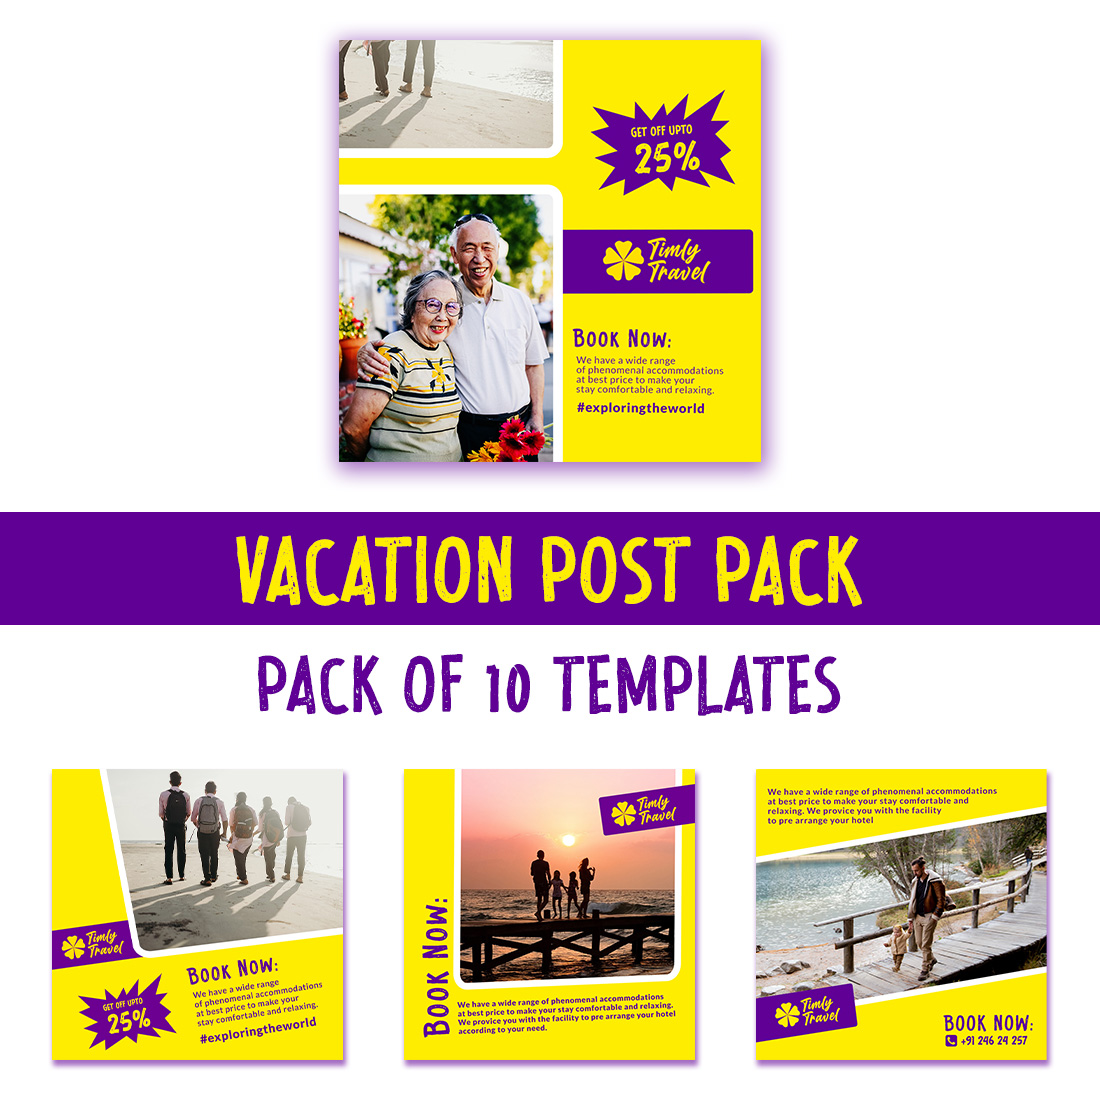 Vacation Social Media Post Template (Tourism - travel) cover image.